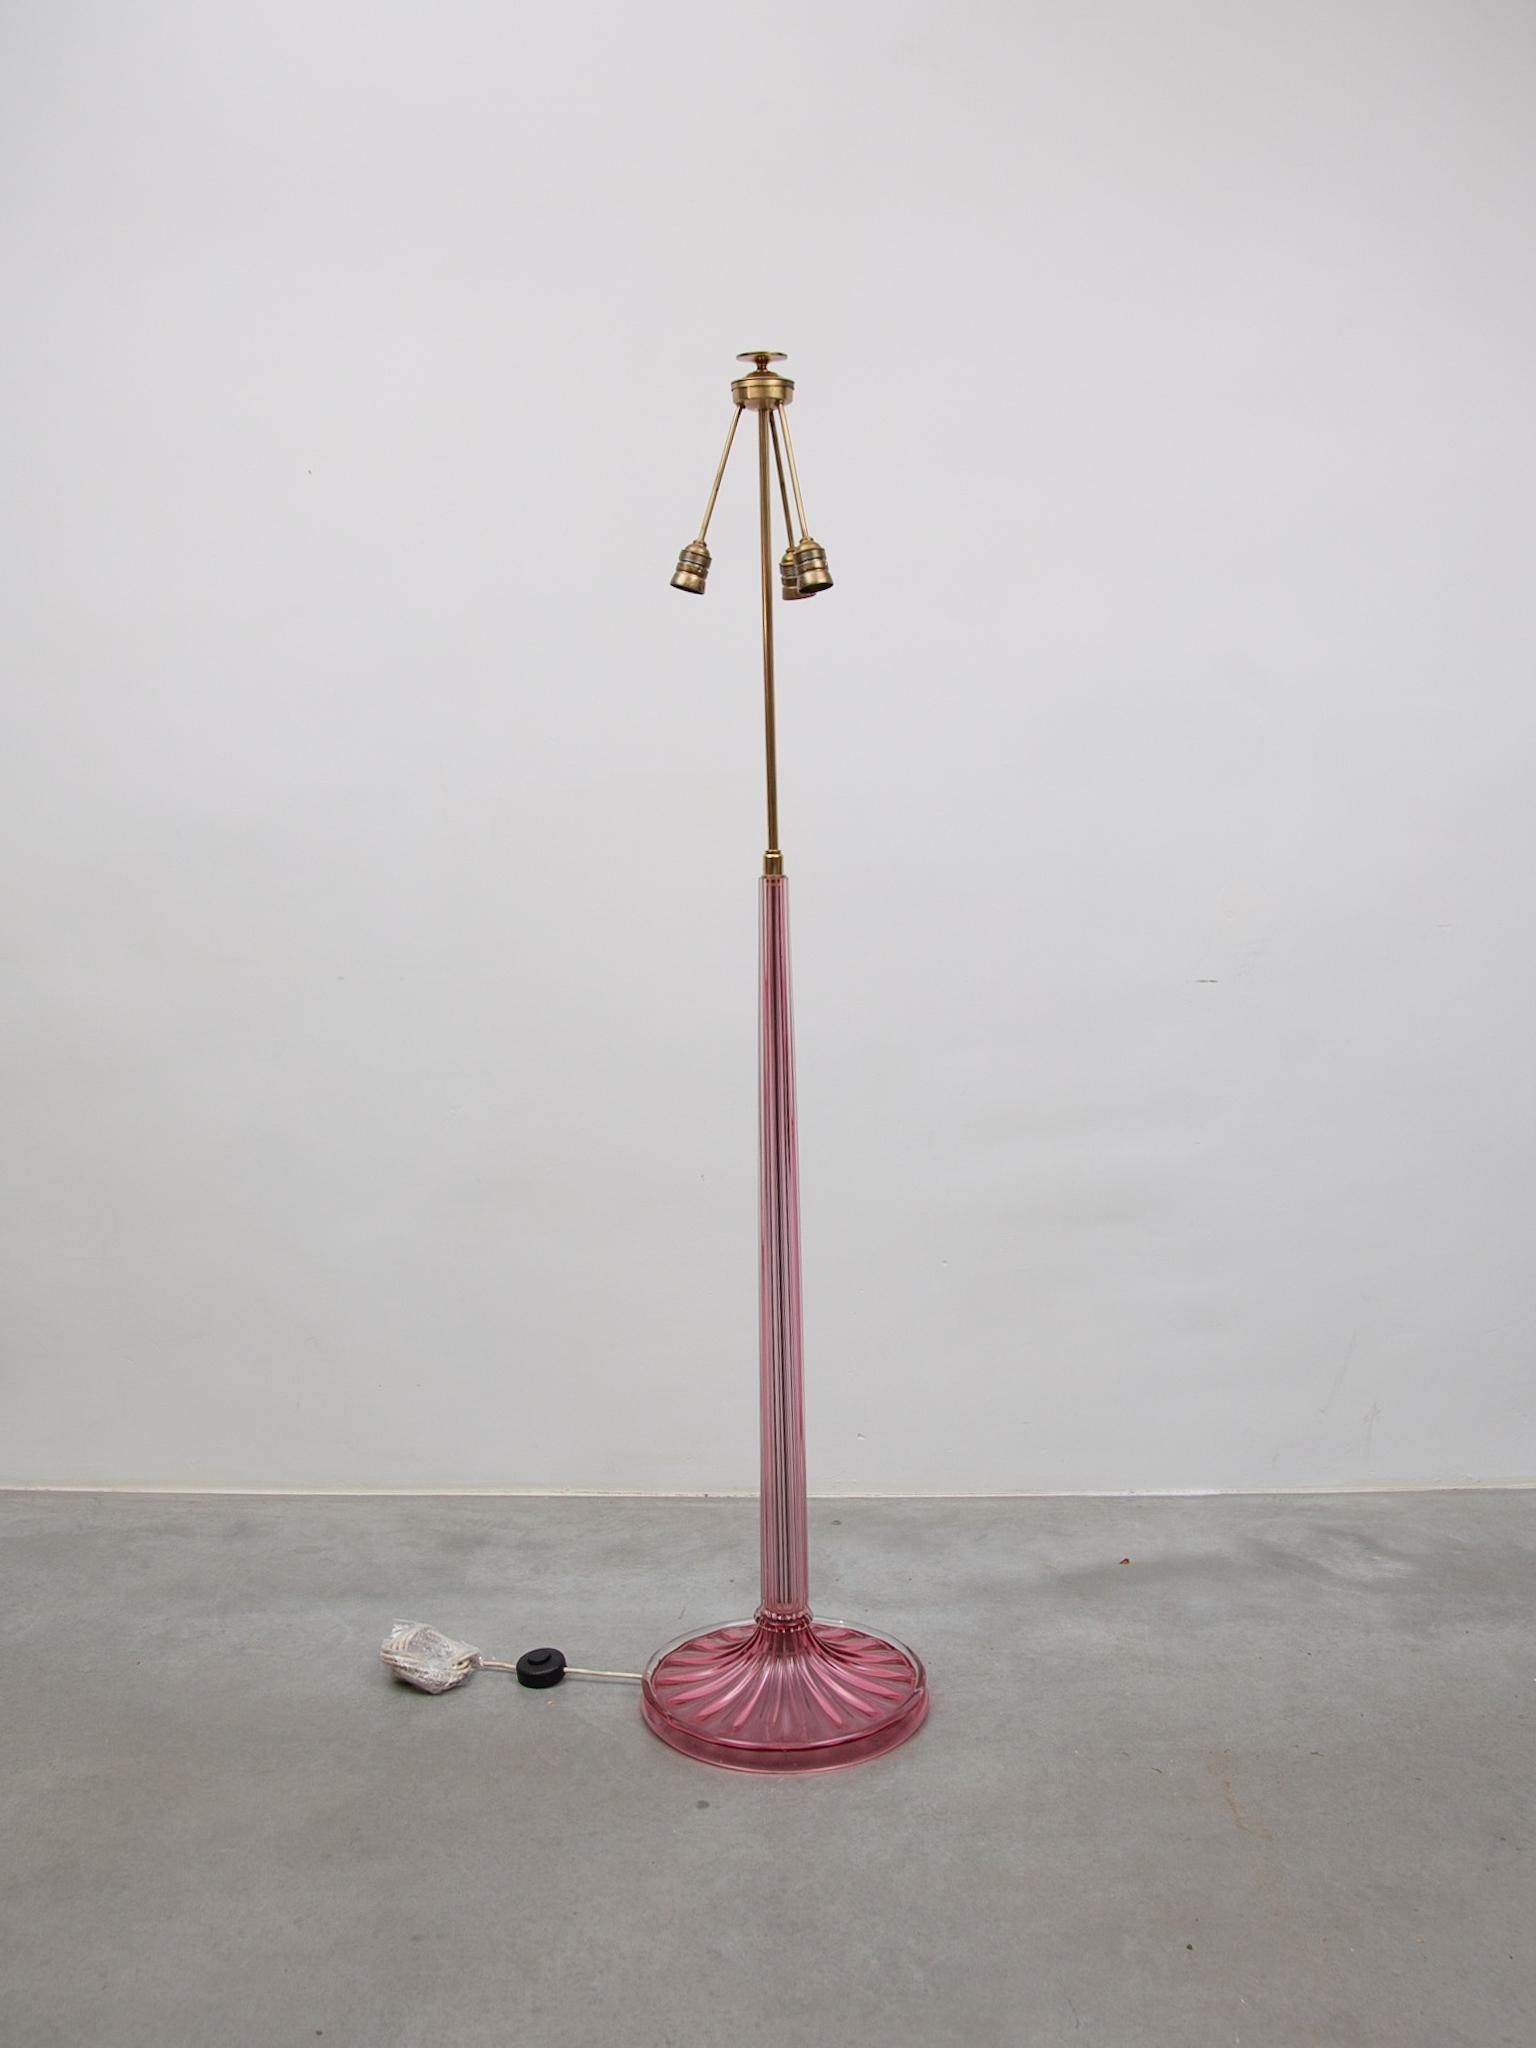 Midcentury modern Italian Murano glass art for collectors worldwide we are offering this very rare and stylish floor lamp and entirely made of mount blown glas and brass elements. This unique design and pink colored glass make this midcentury floor